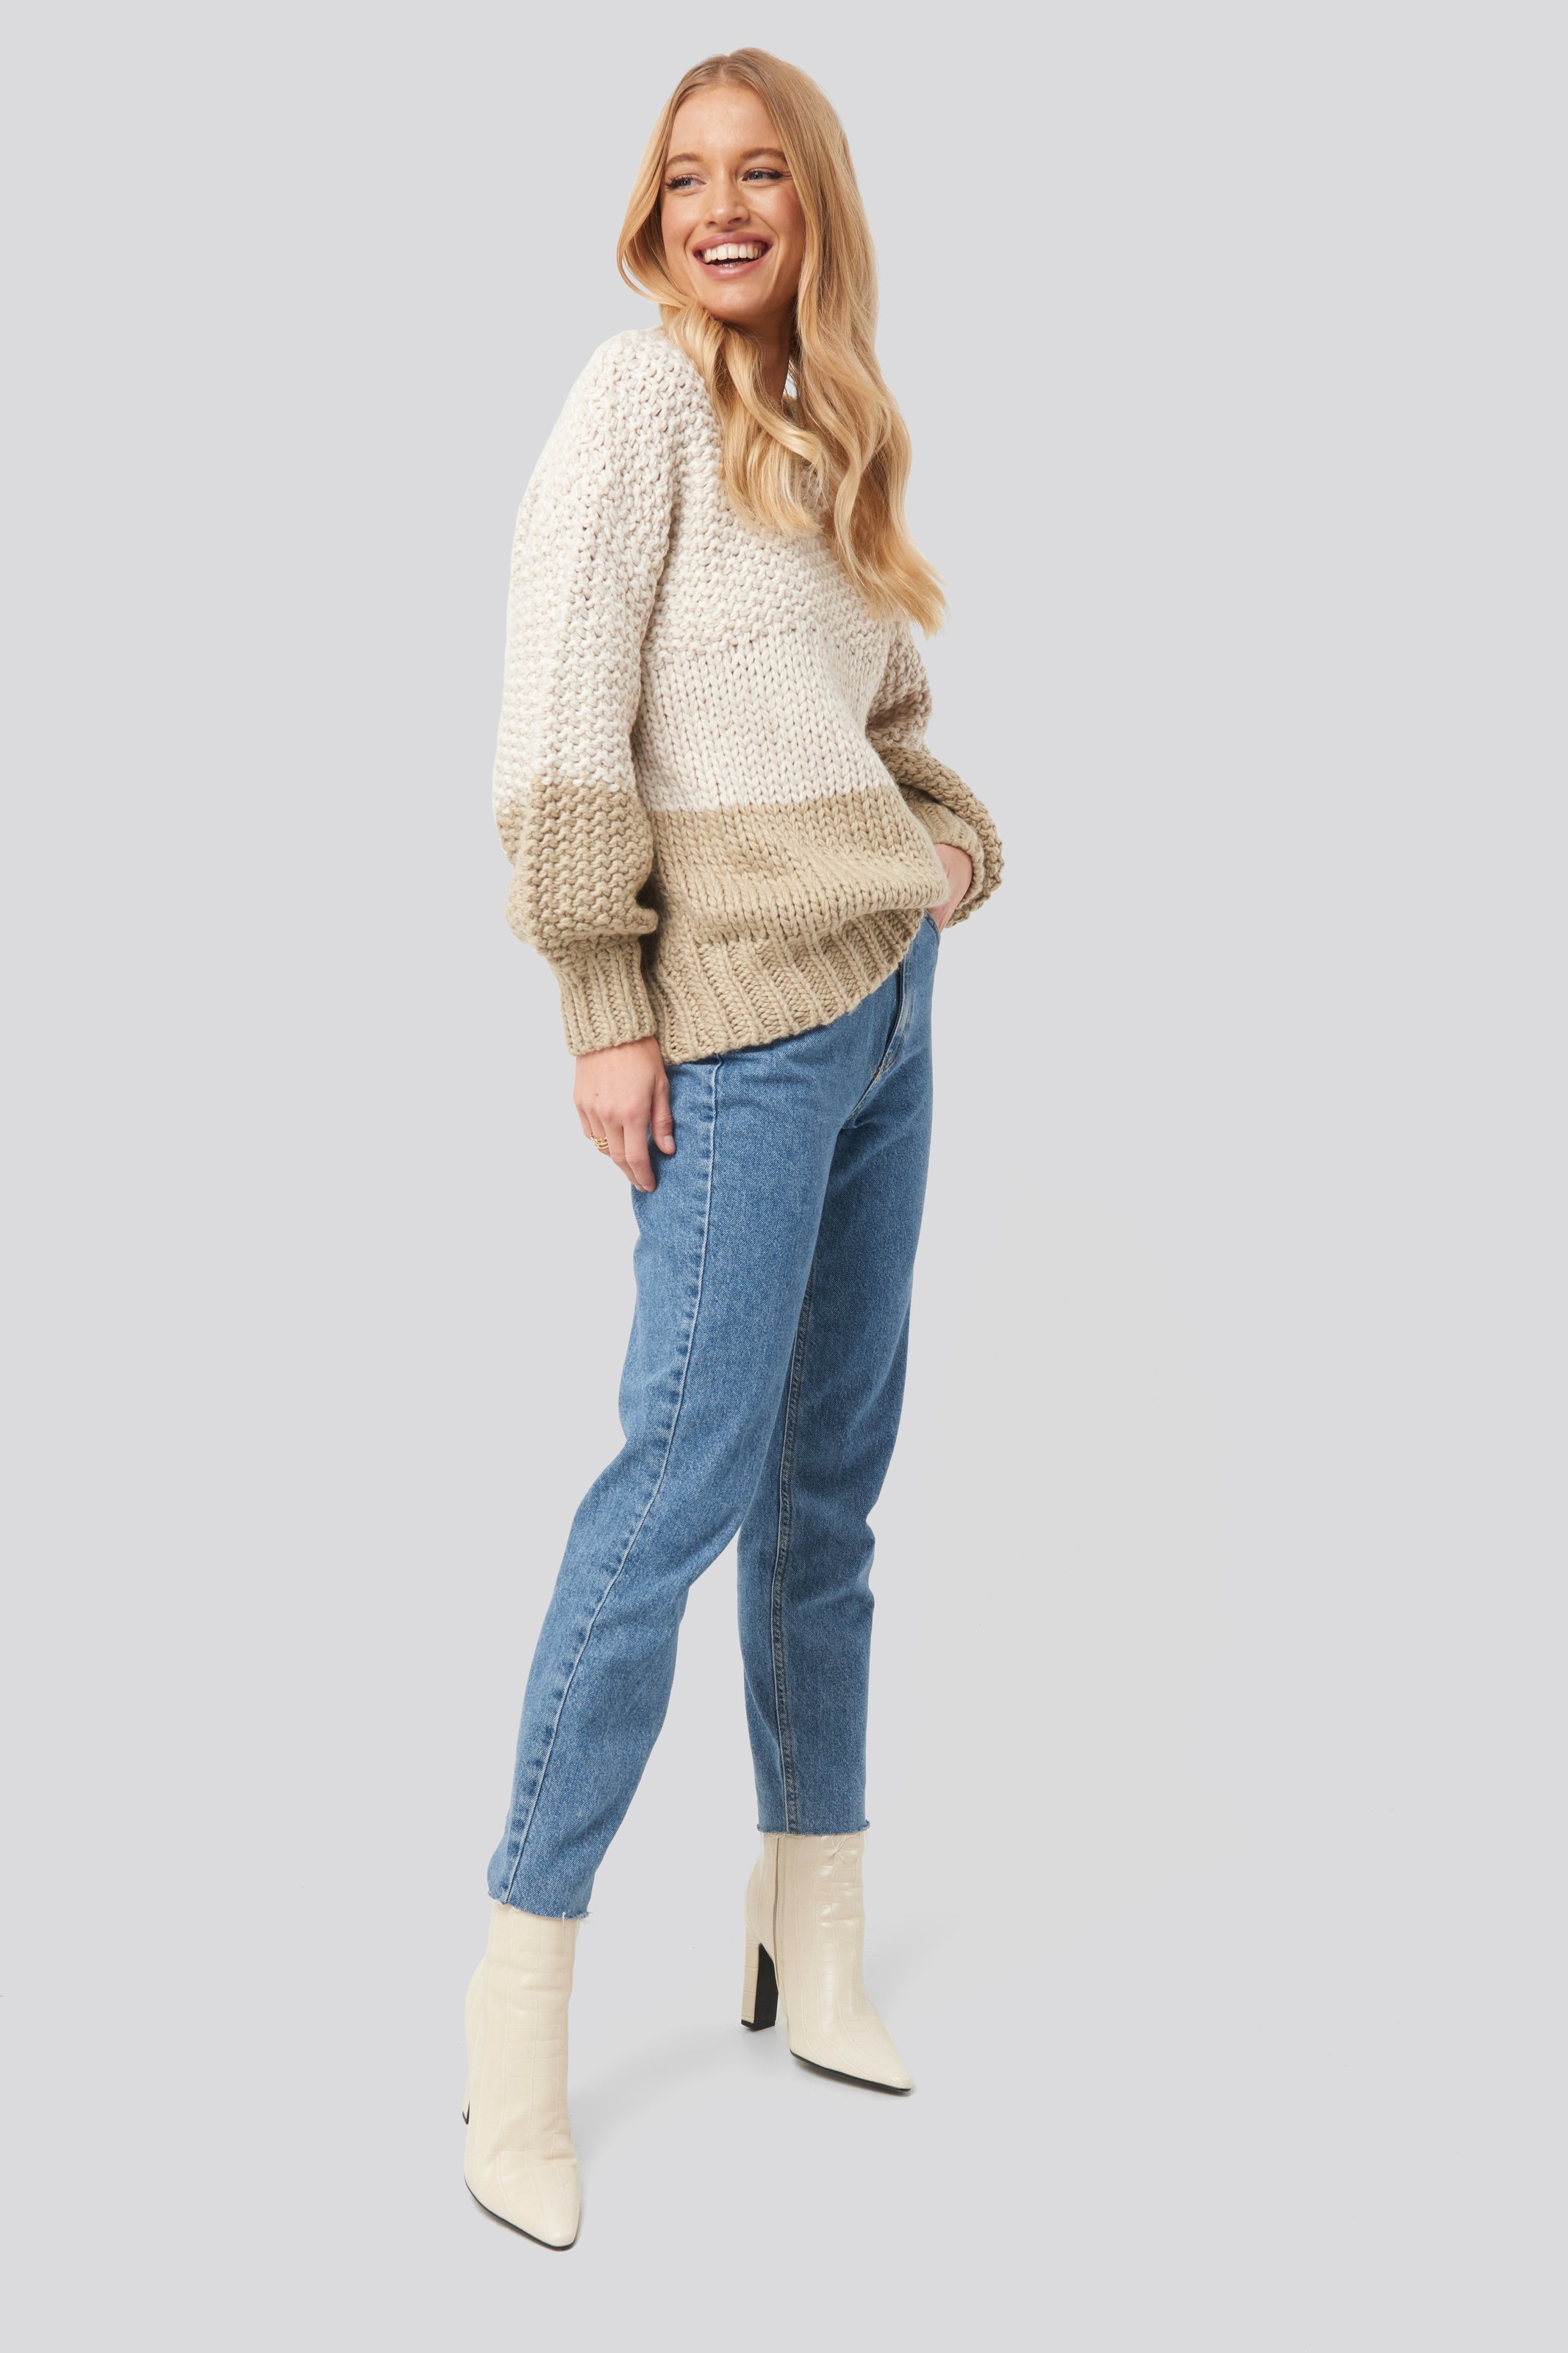 Two Coloured Heavy Knitted Sweater Outfit.